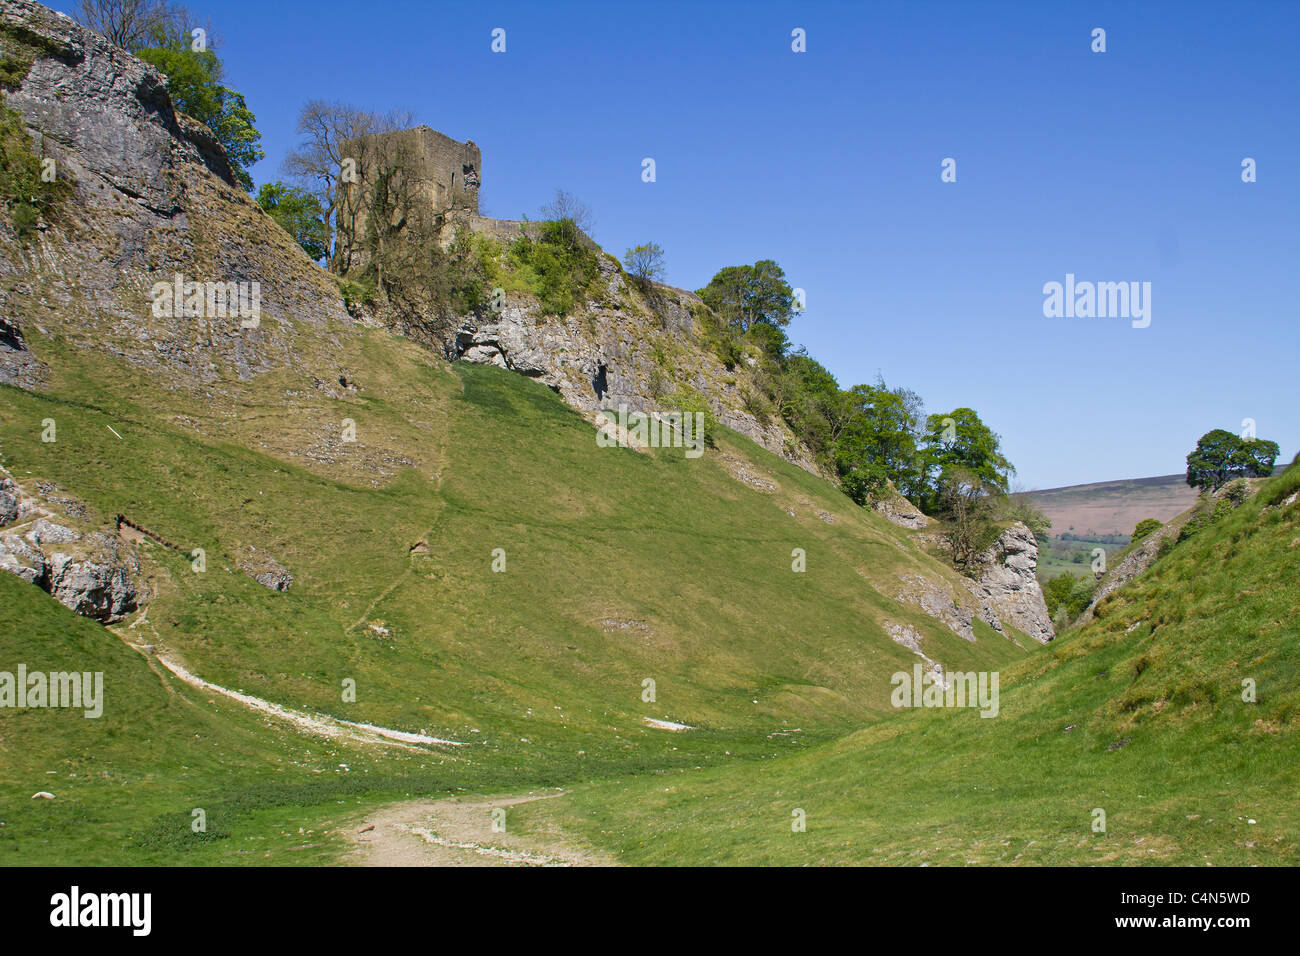 Looking up at Peveril Castle from the path through CaveDale, Castleton Stock Photo